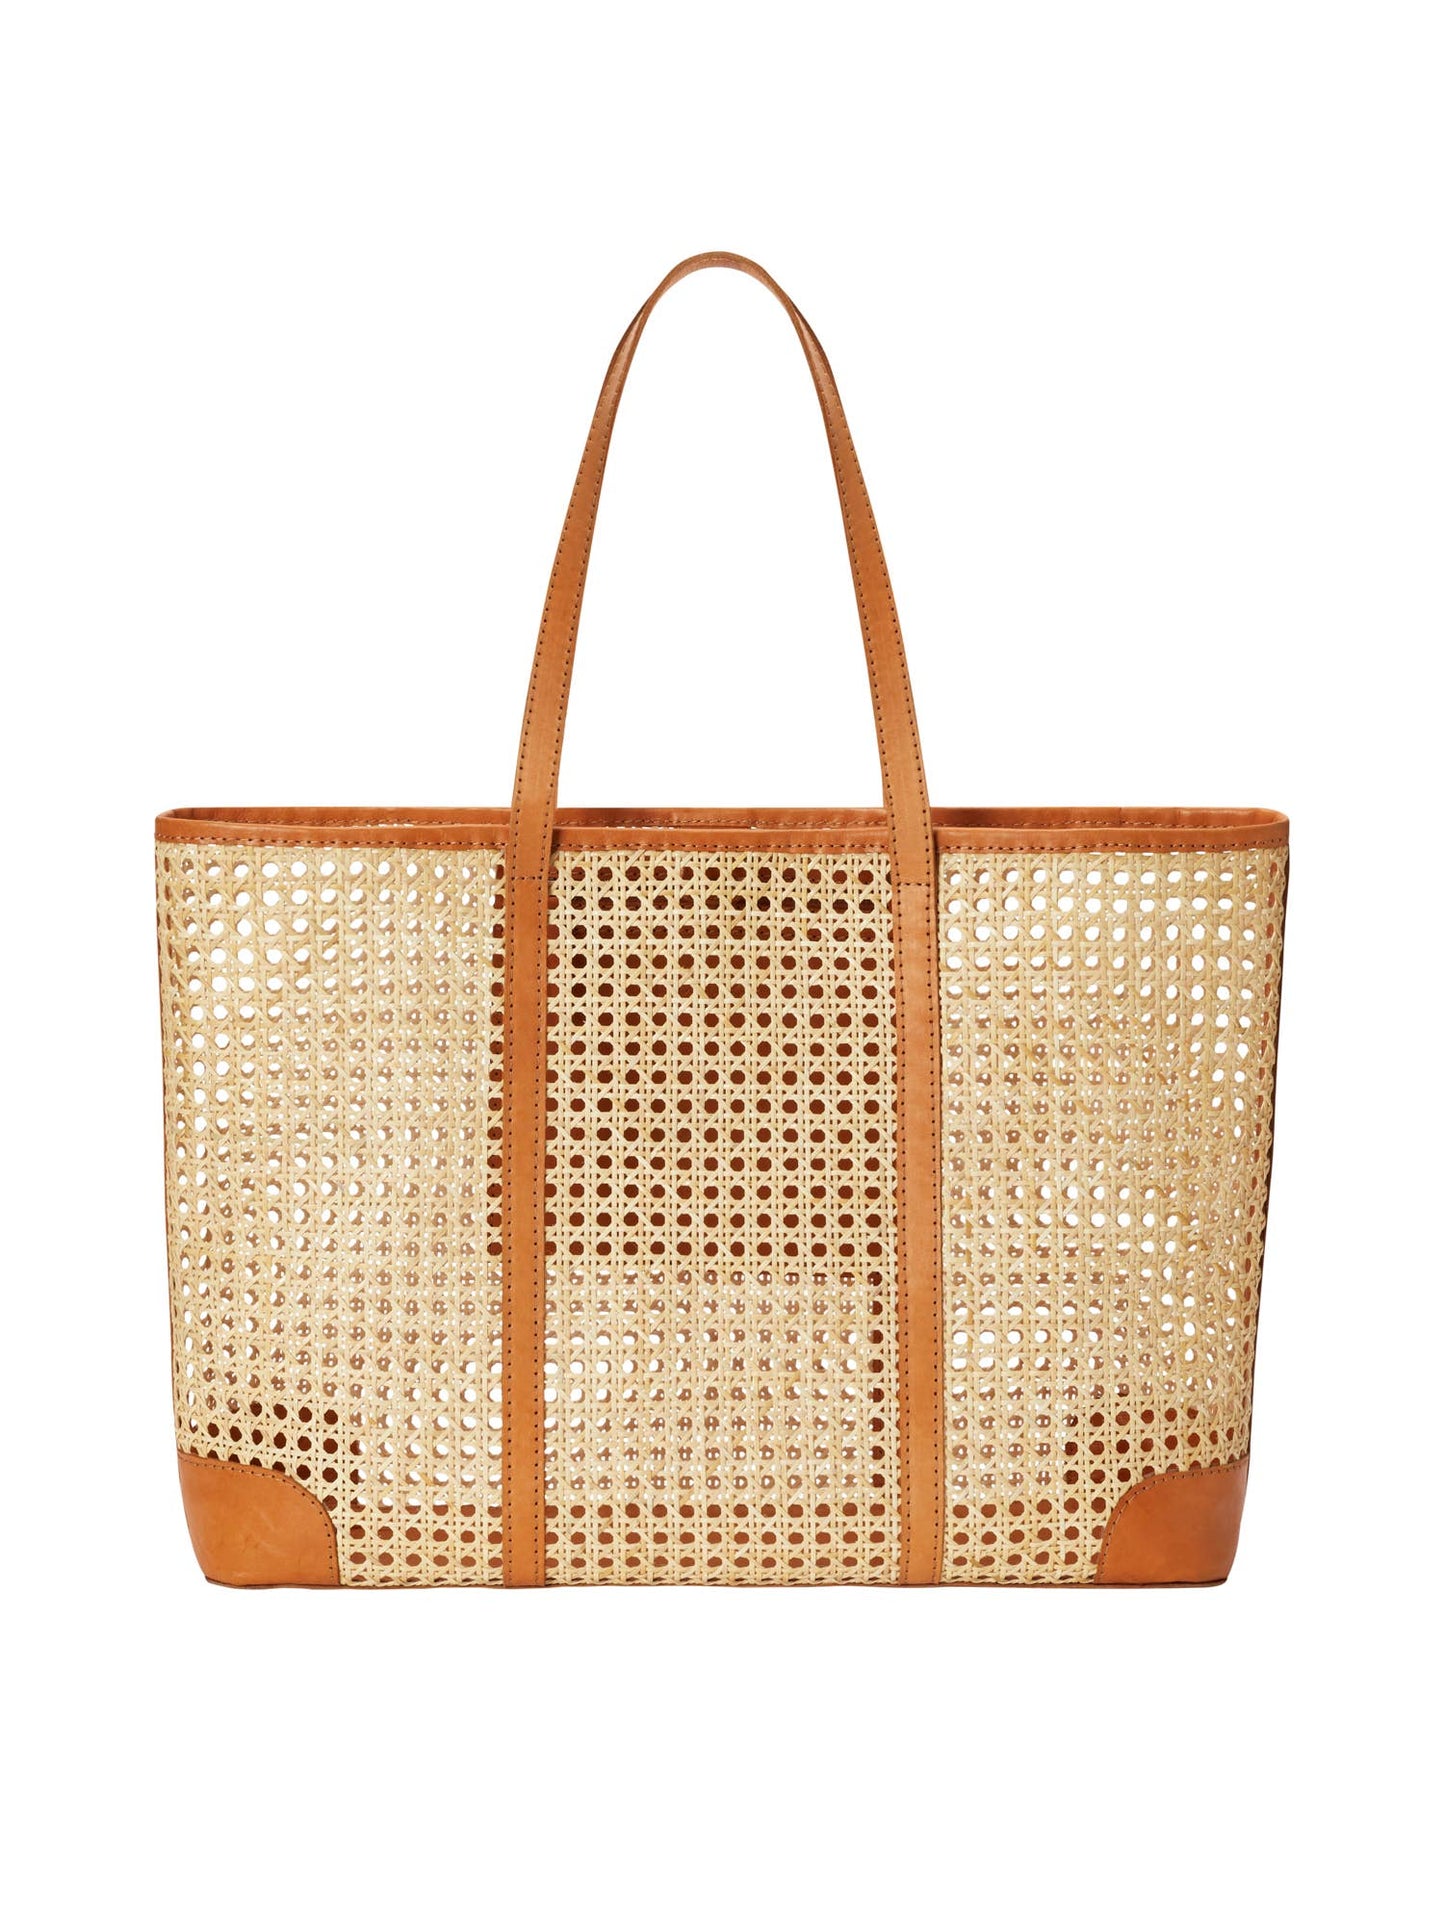 Mia Woven Rattan and Leather Tote - Large